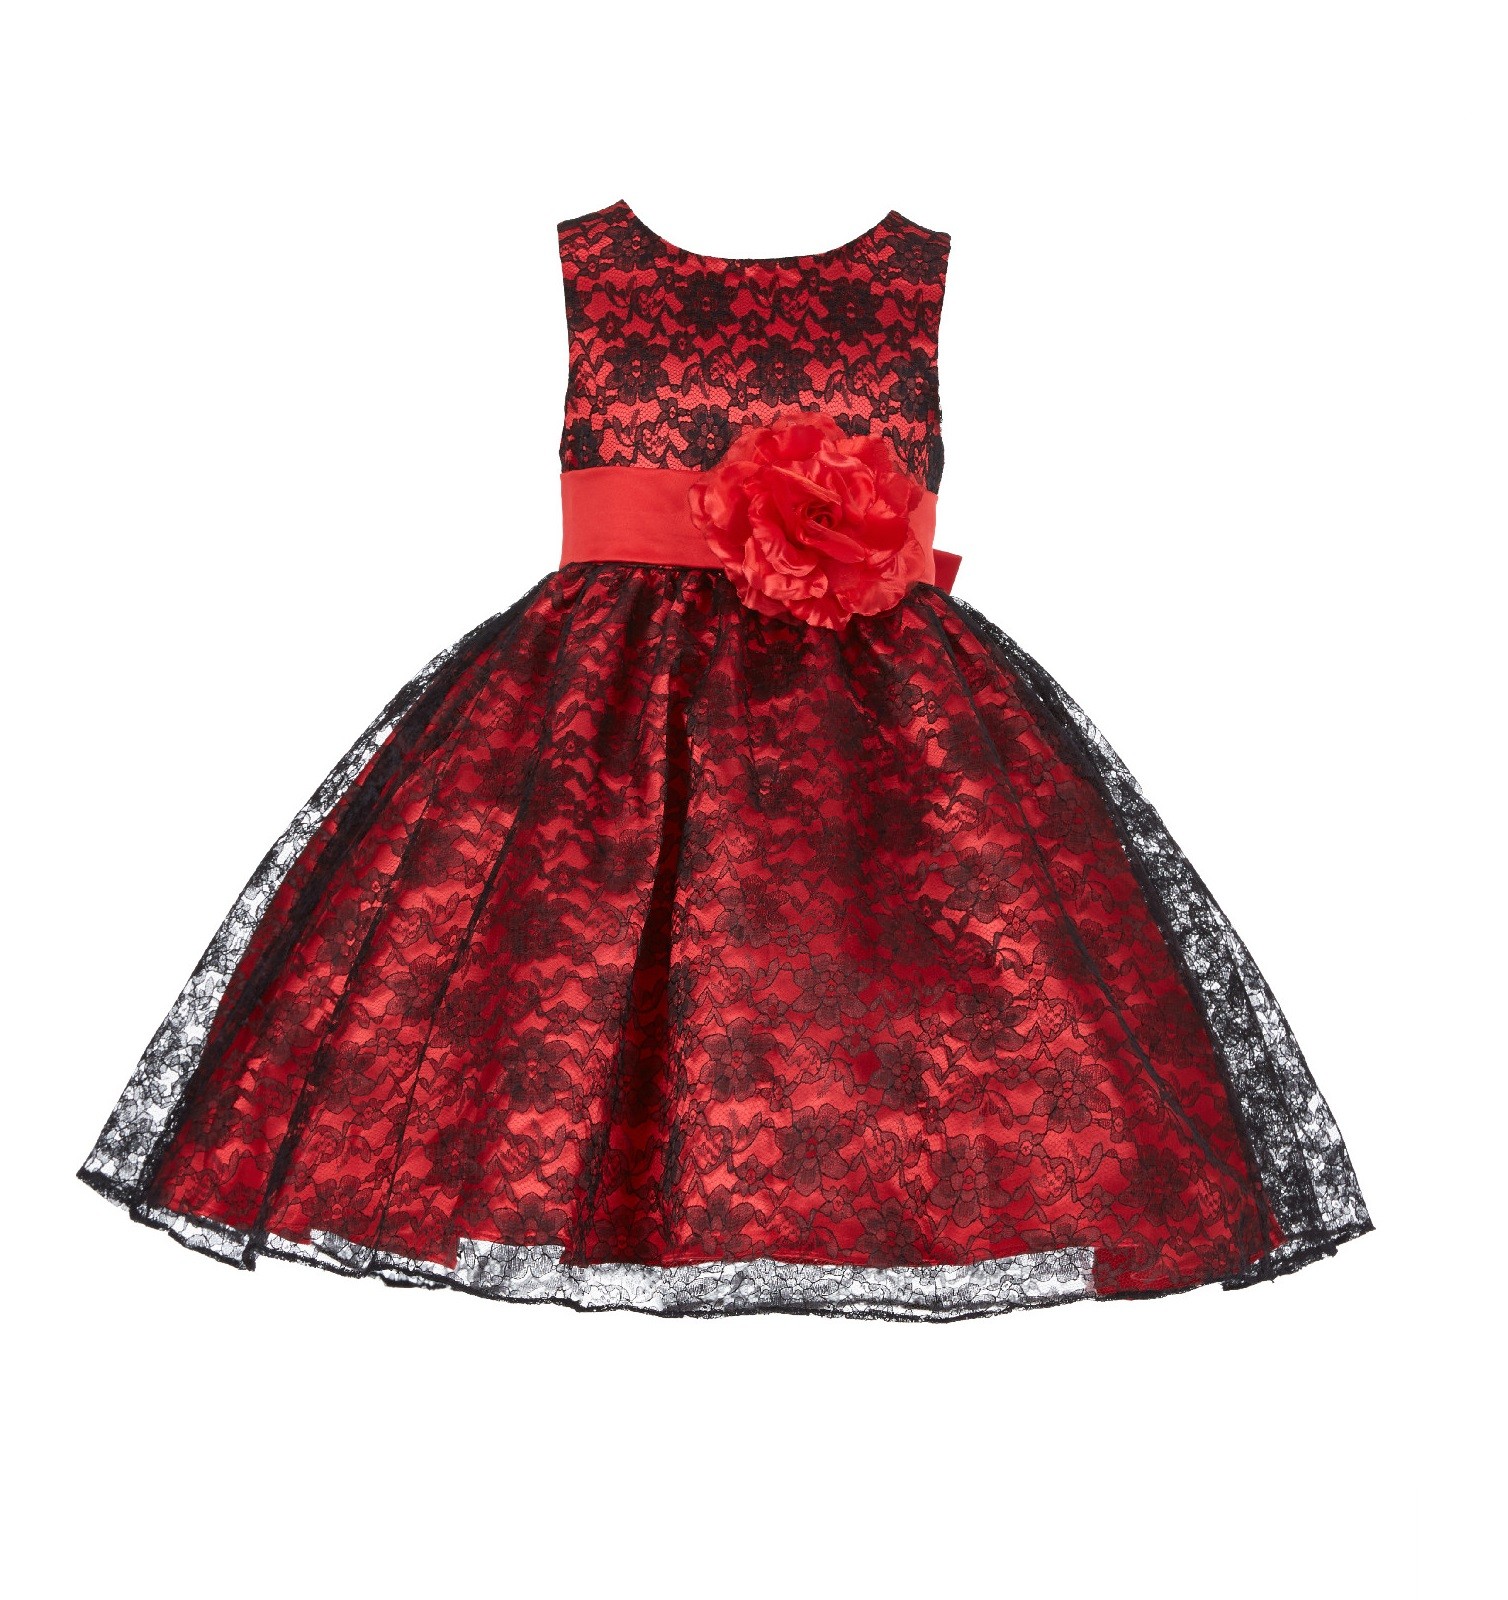 Red/Black/Red Floral Lace Overlay Flower Girl Dress Formal Beauty 163S